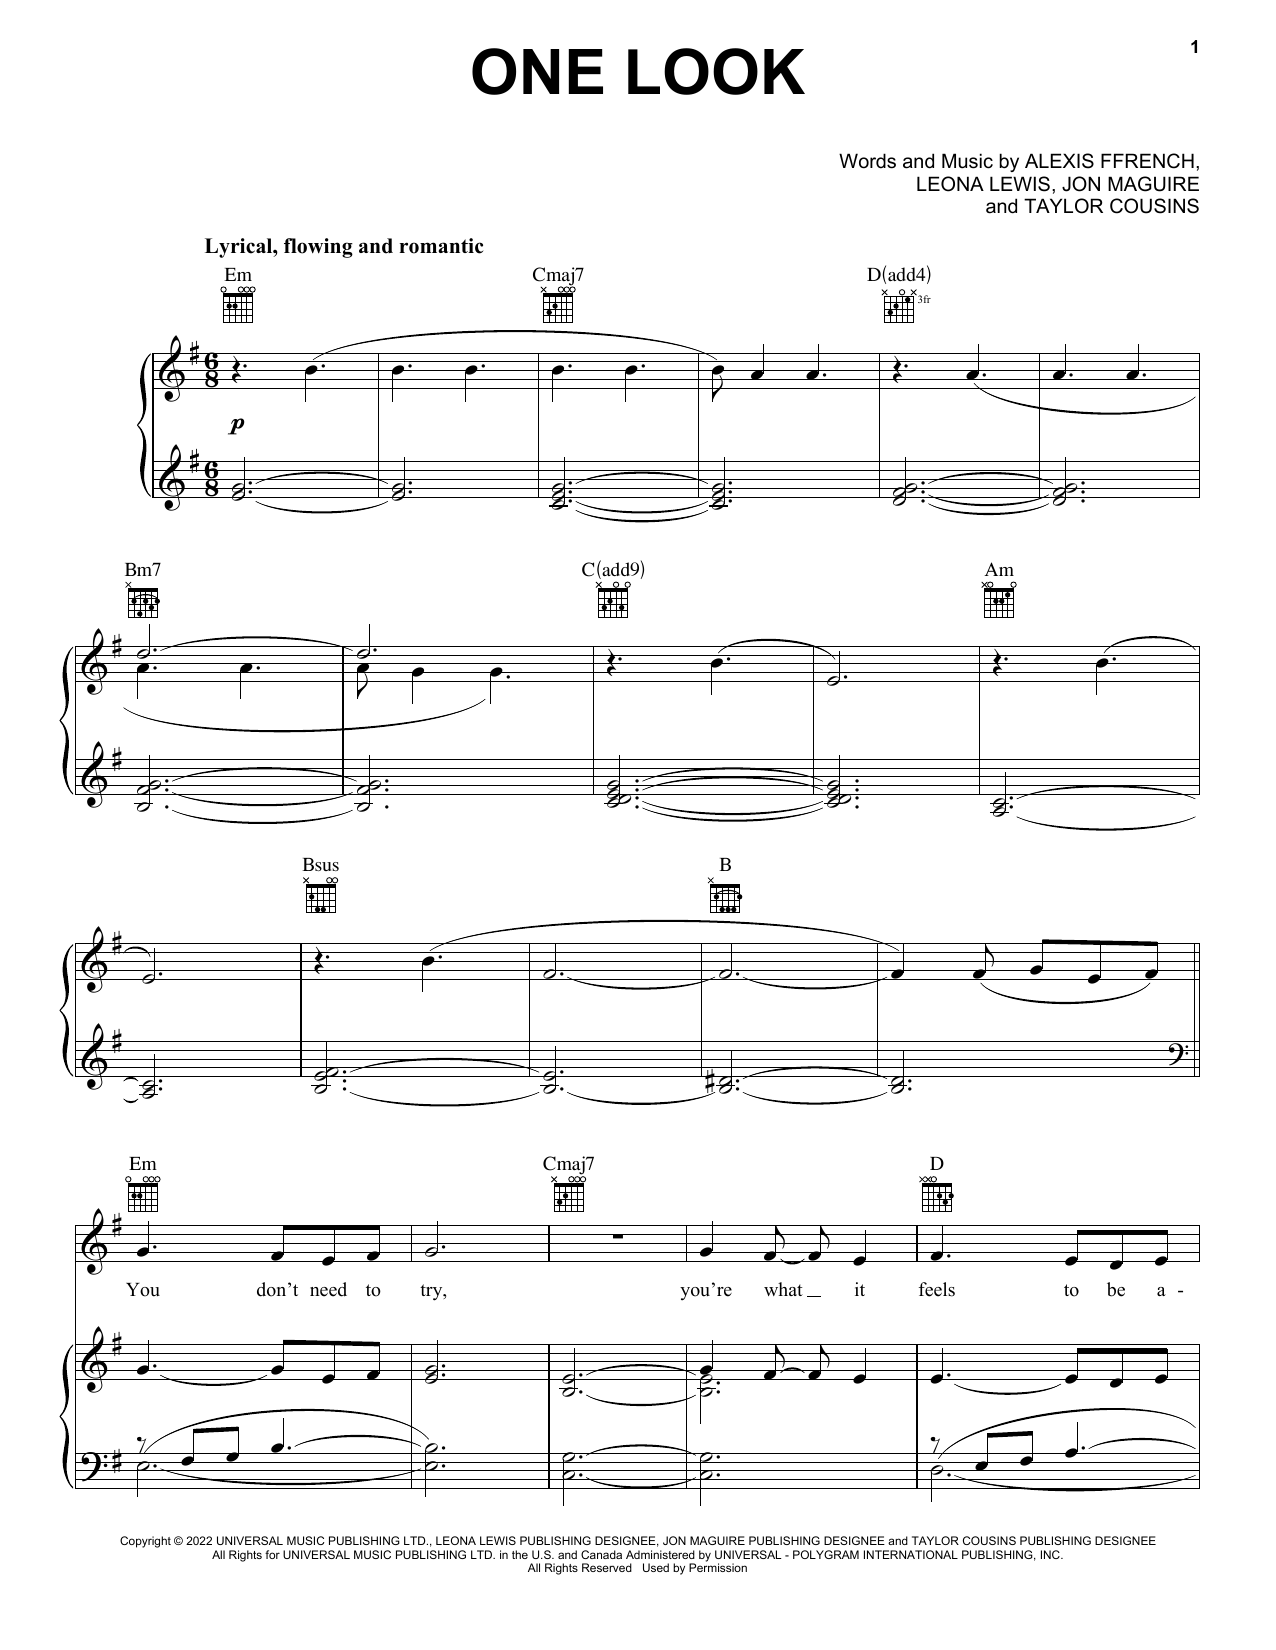 Download Alexis Ffrench One Look (feat. Leona Lewis) Sheet Music